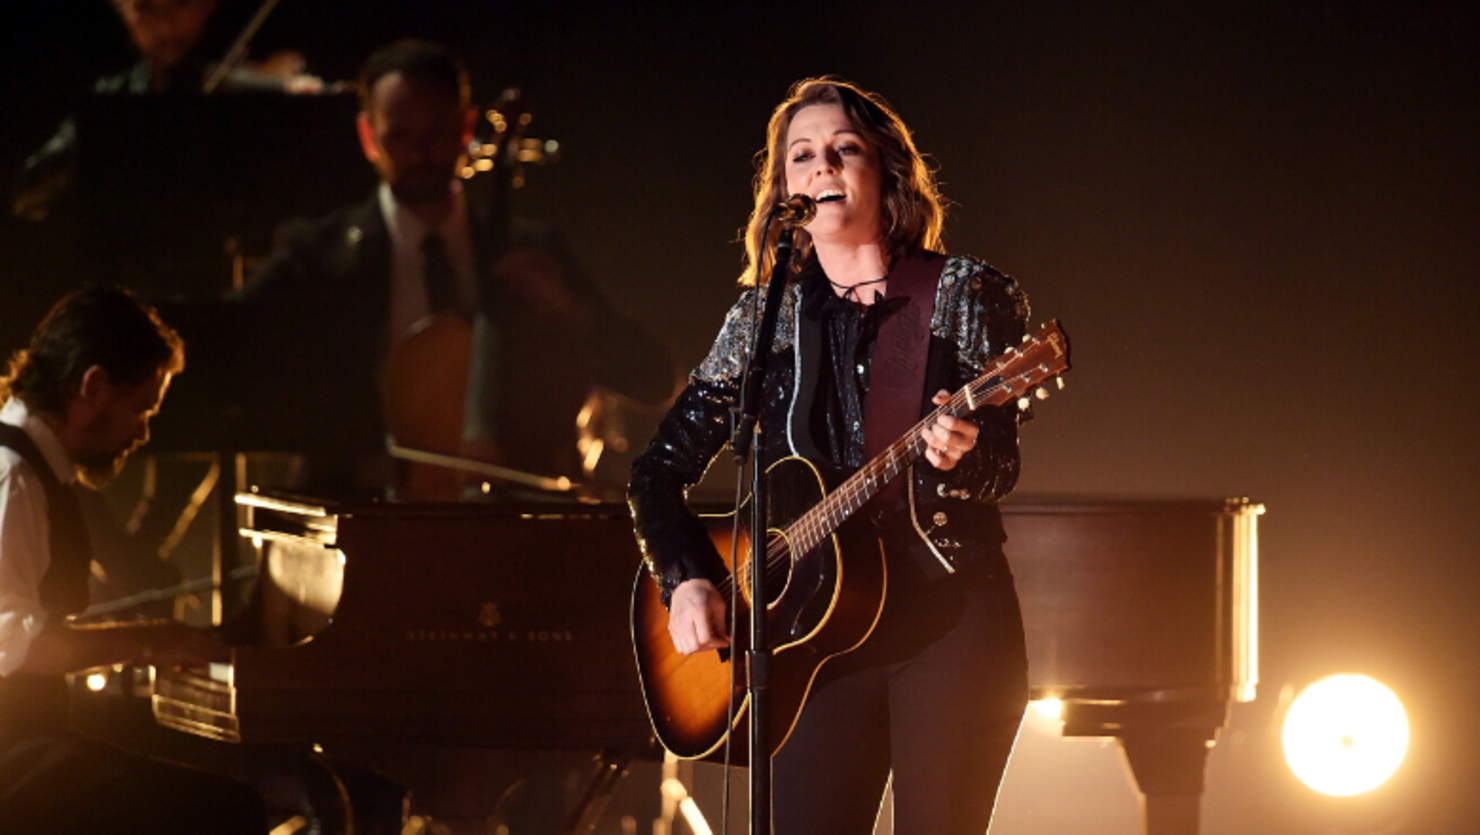 Brandi Carlile Raises Over $100K For Racial Injustice During Birthday Show